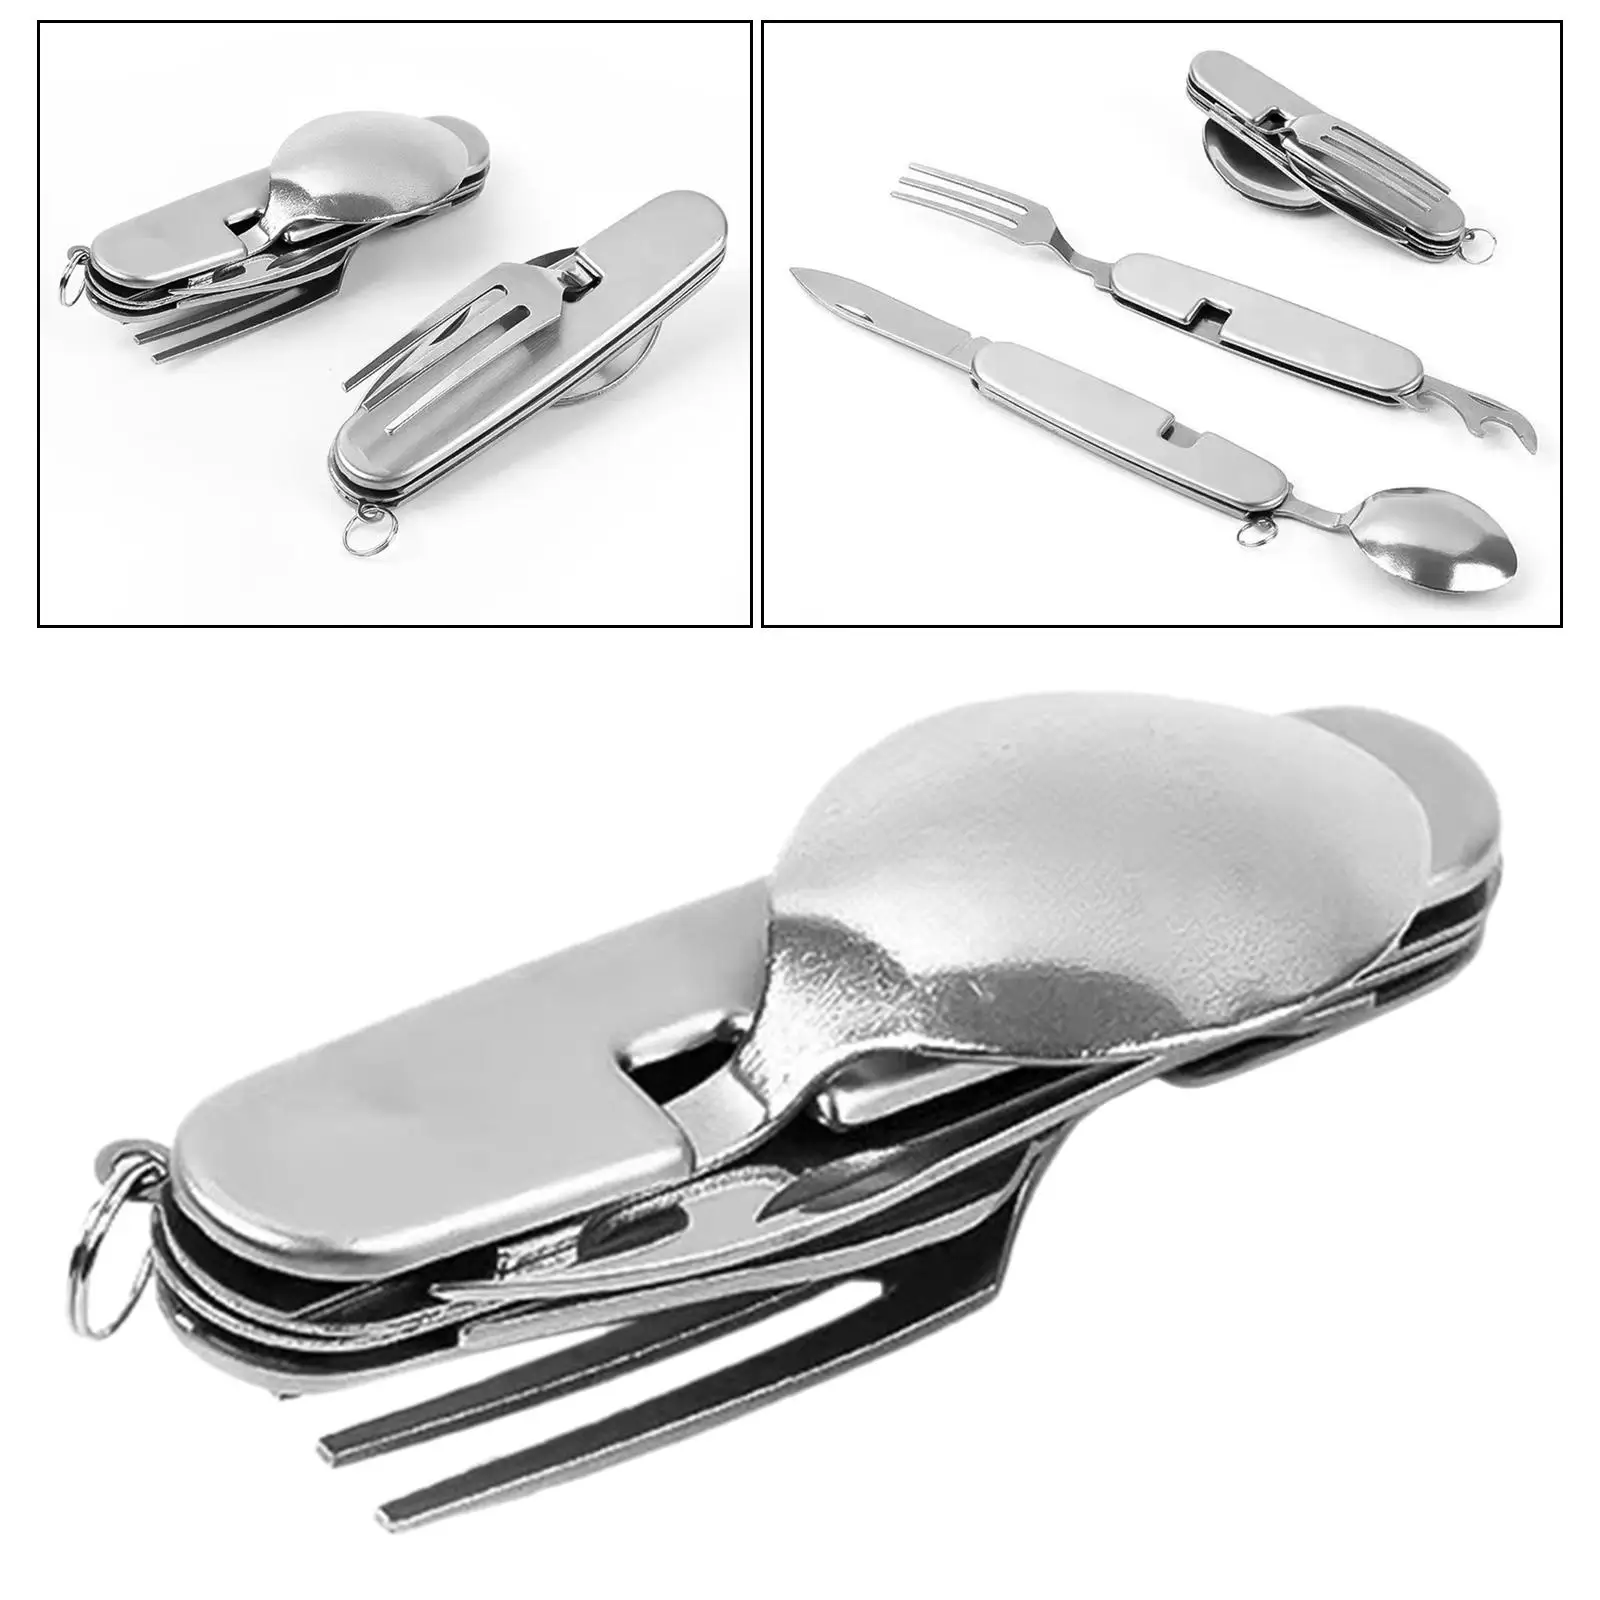 5 in 1 Camping Utensils Foldable Flatware Cookware Dinnerware Camping Cutlery for Outdoor Traveling Backpacking Picnic Hiking